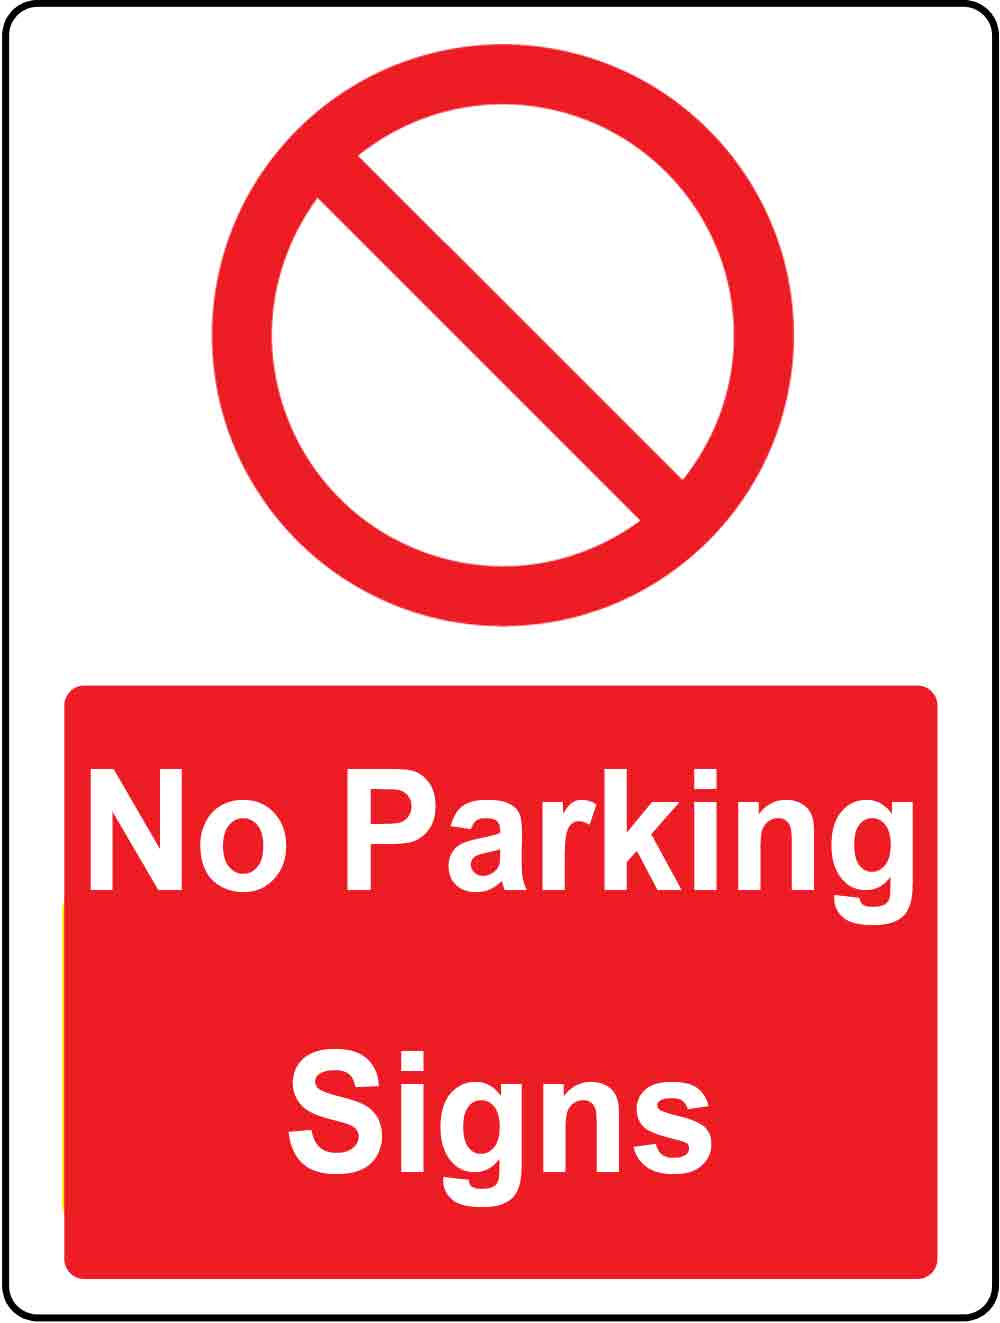 Traffic Signs Parking Stop Road Safety ...